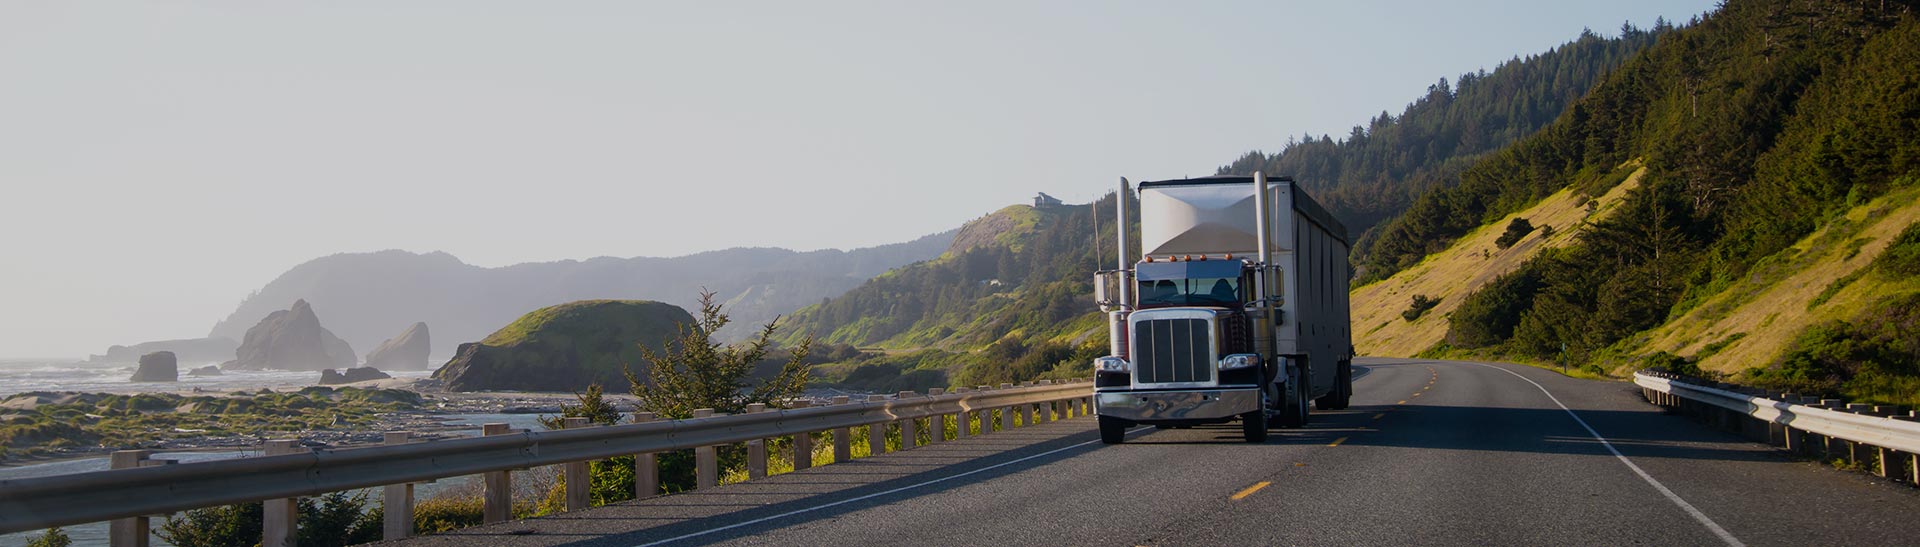 Oakville Trucking Service, Freight Forwarding Services and Logistics Services